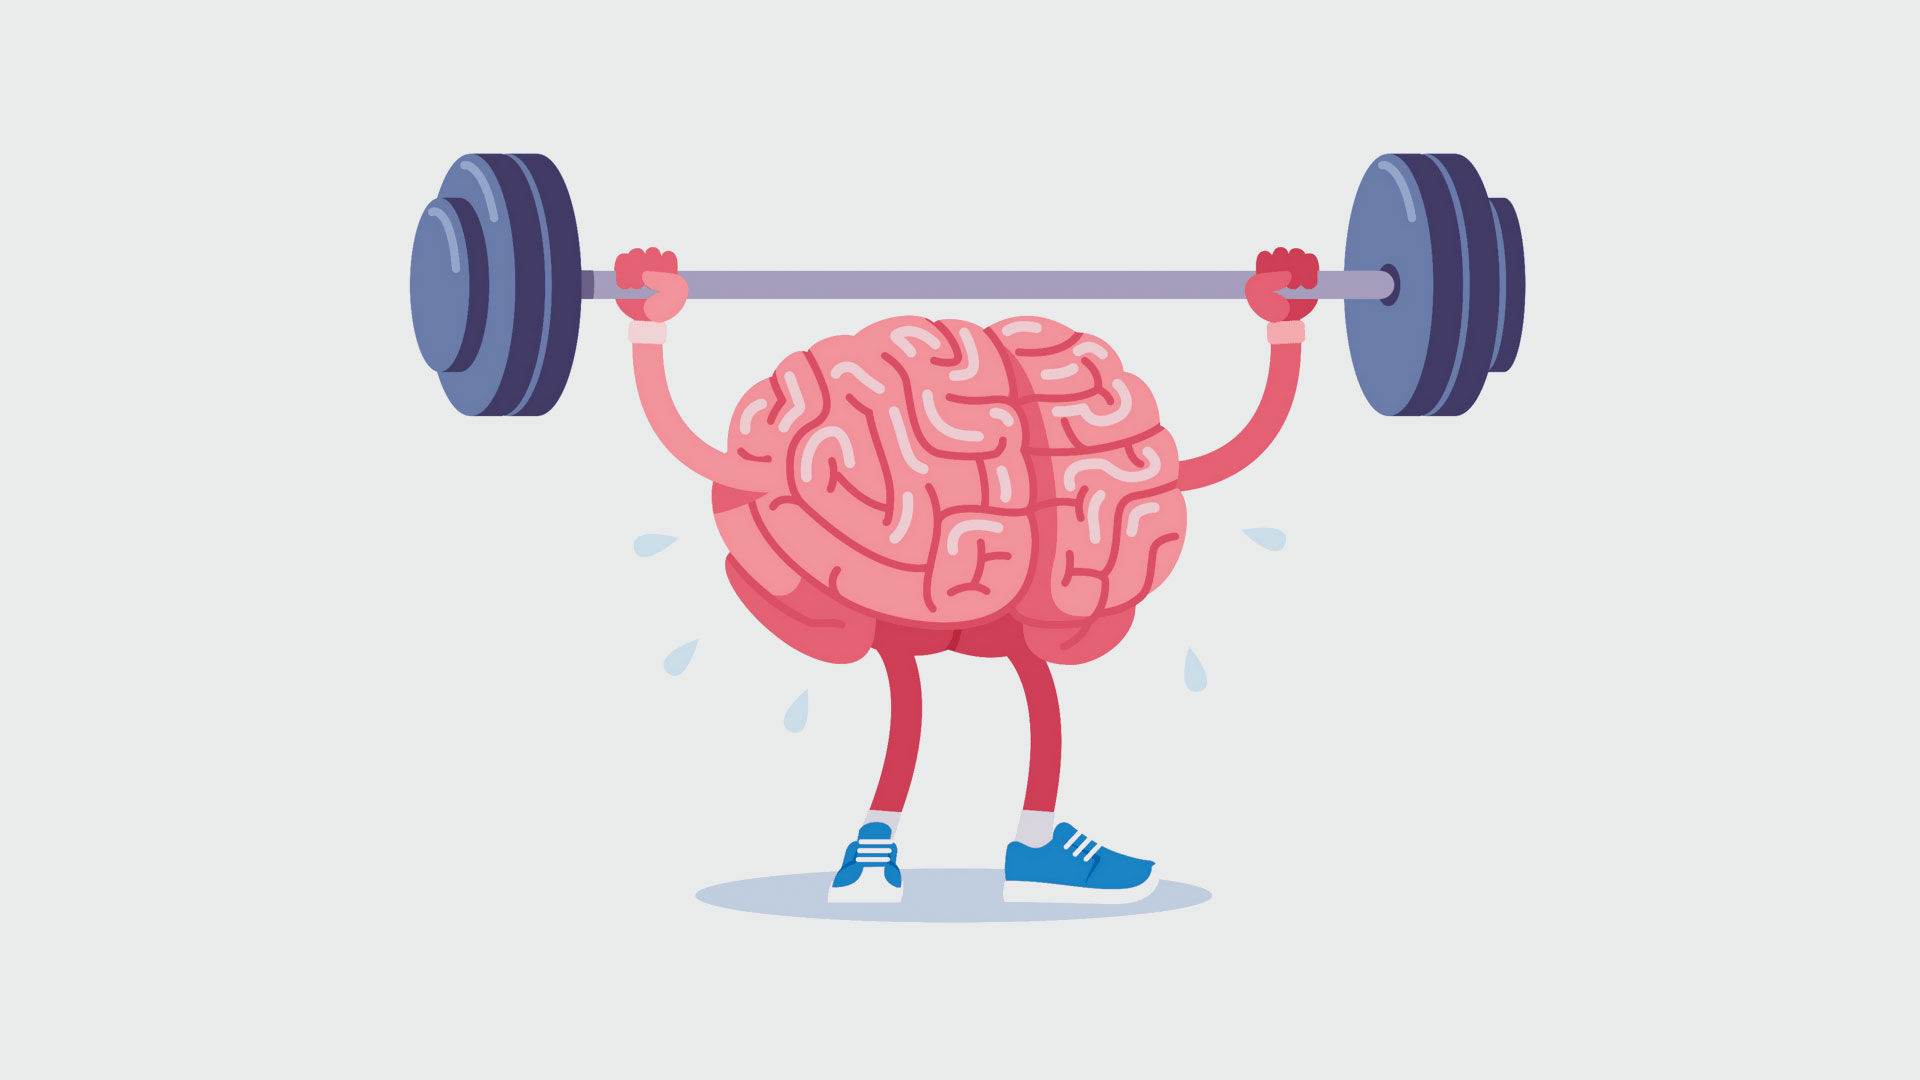 Exercises to Train Your Brain